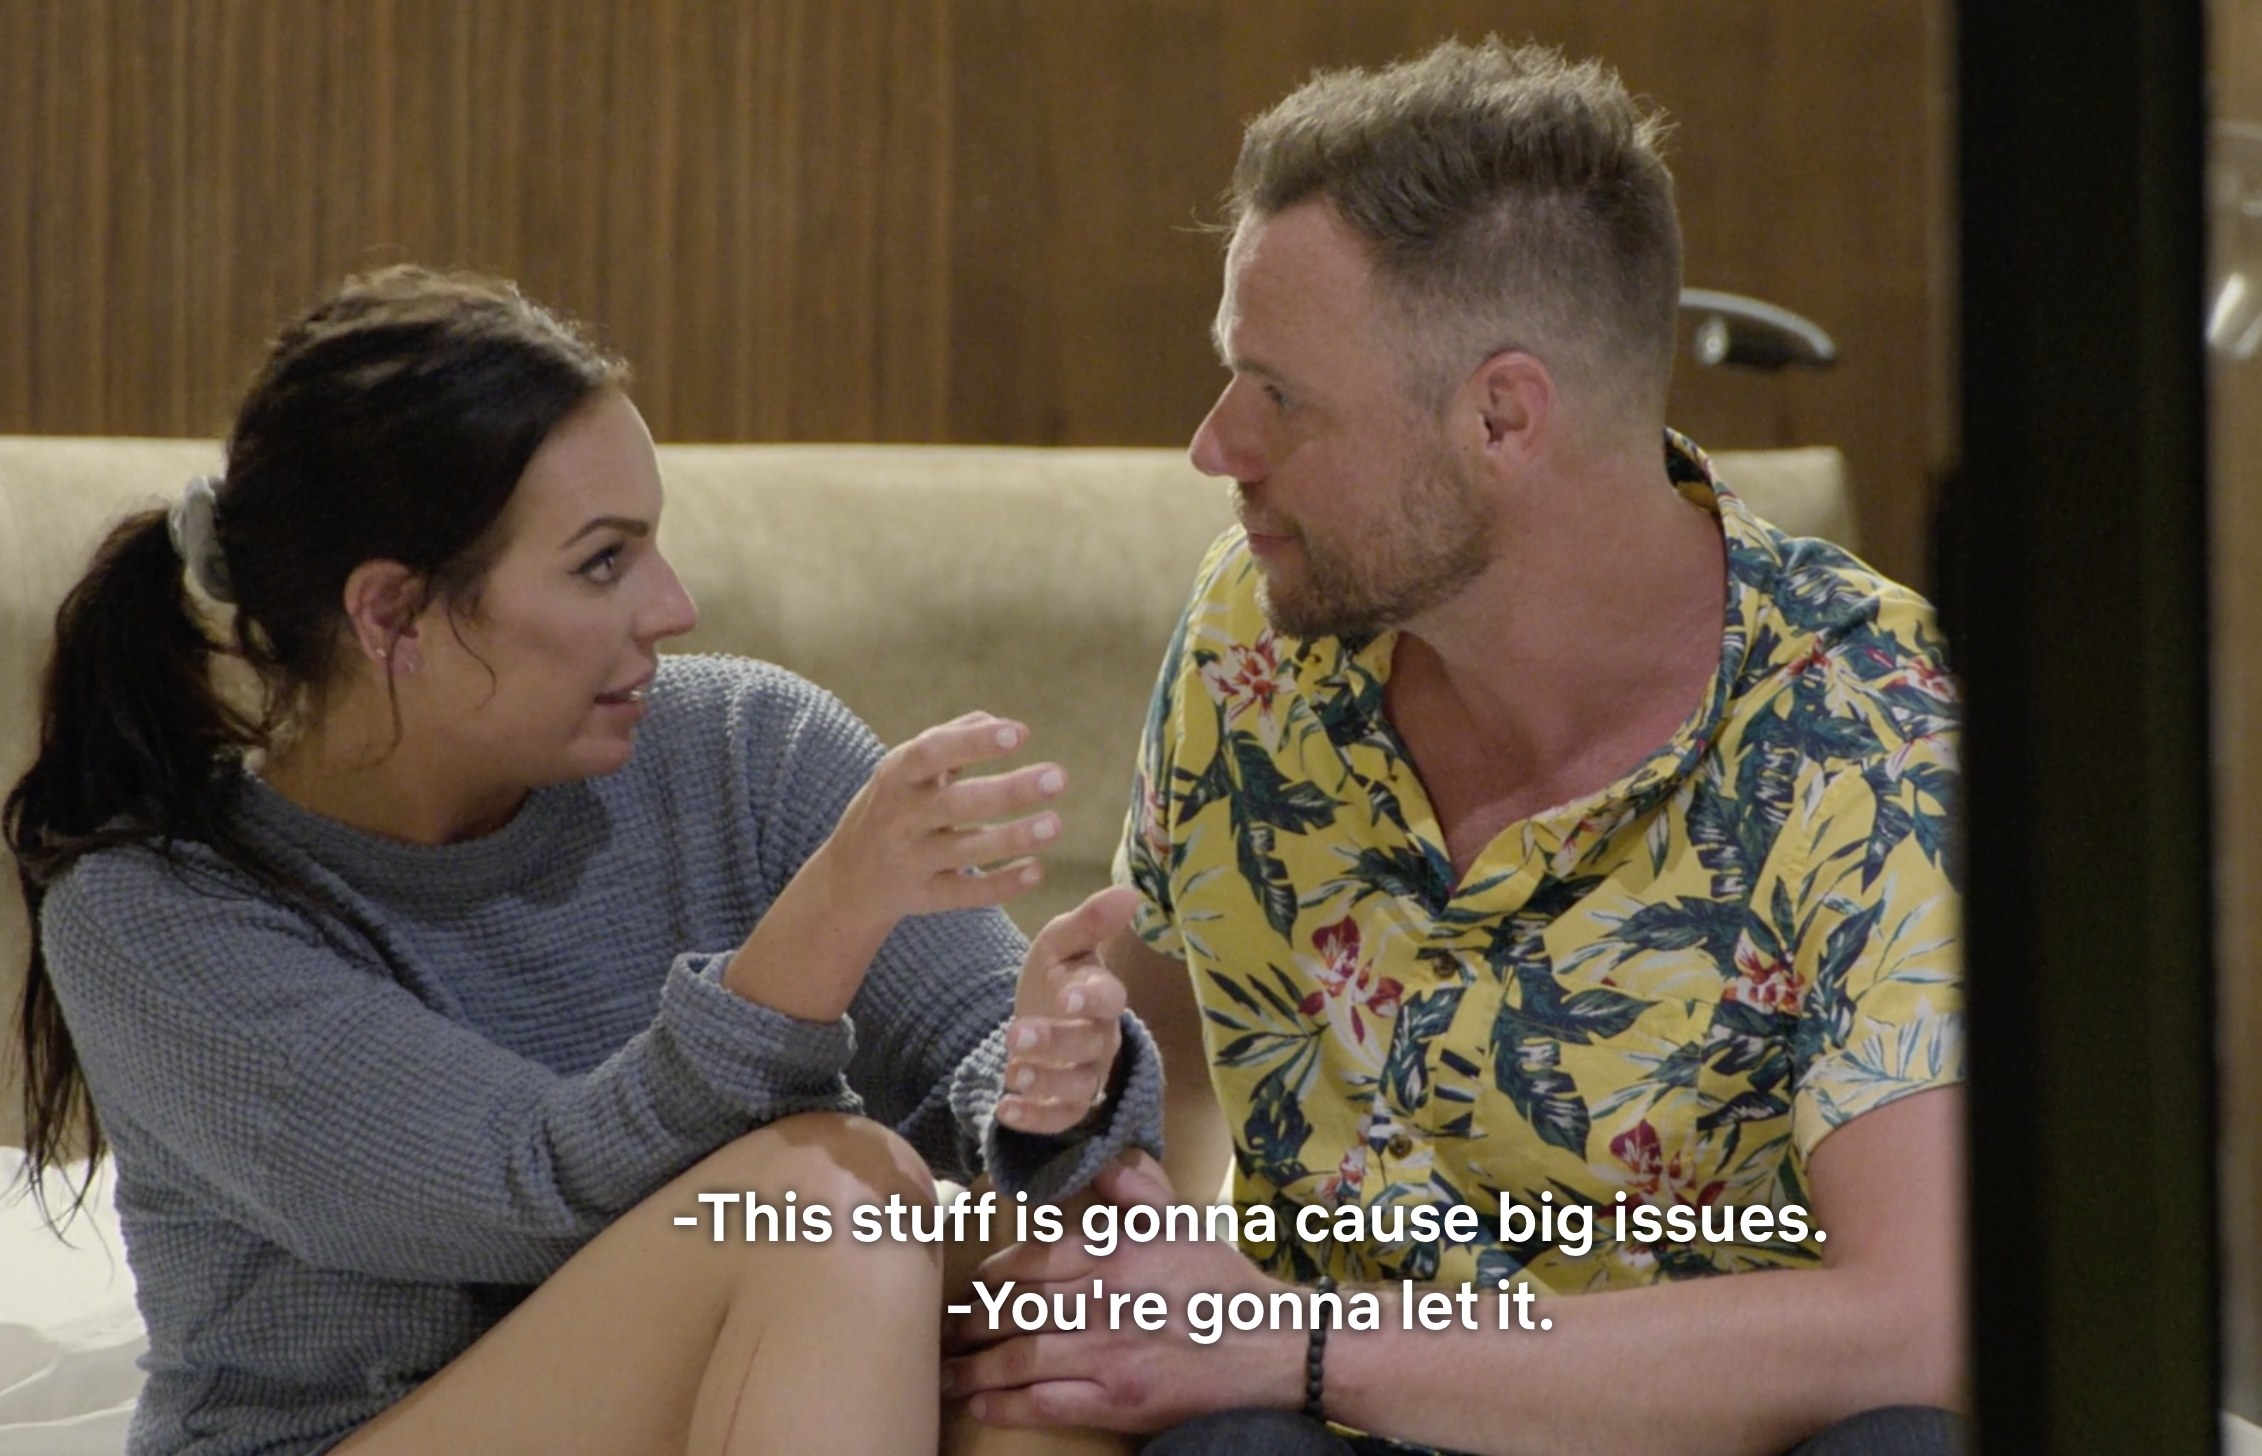 Danielle saying, &quot;This stuff is gonna cause big issues,&quot; and Nick responding, &quot;You&#x27;re gonna let it&quot;